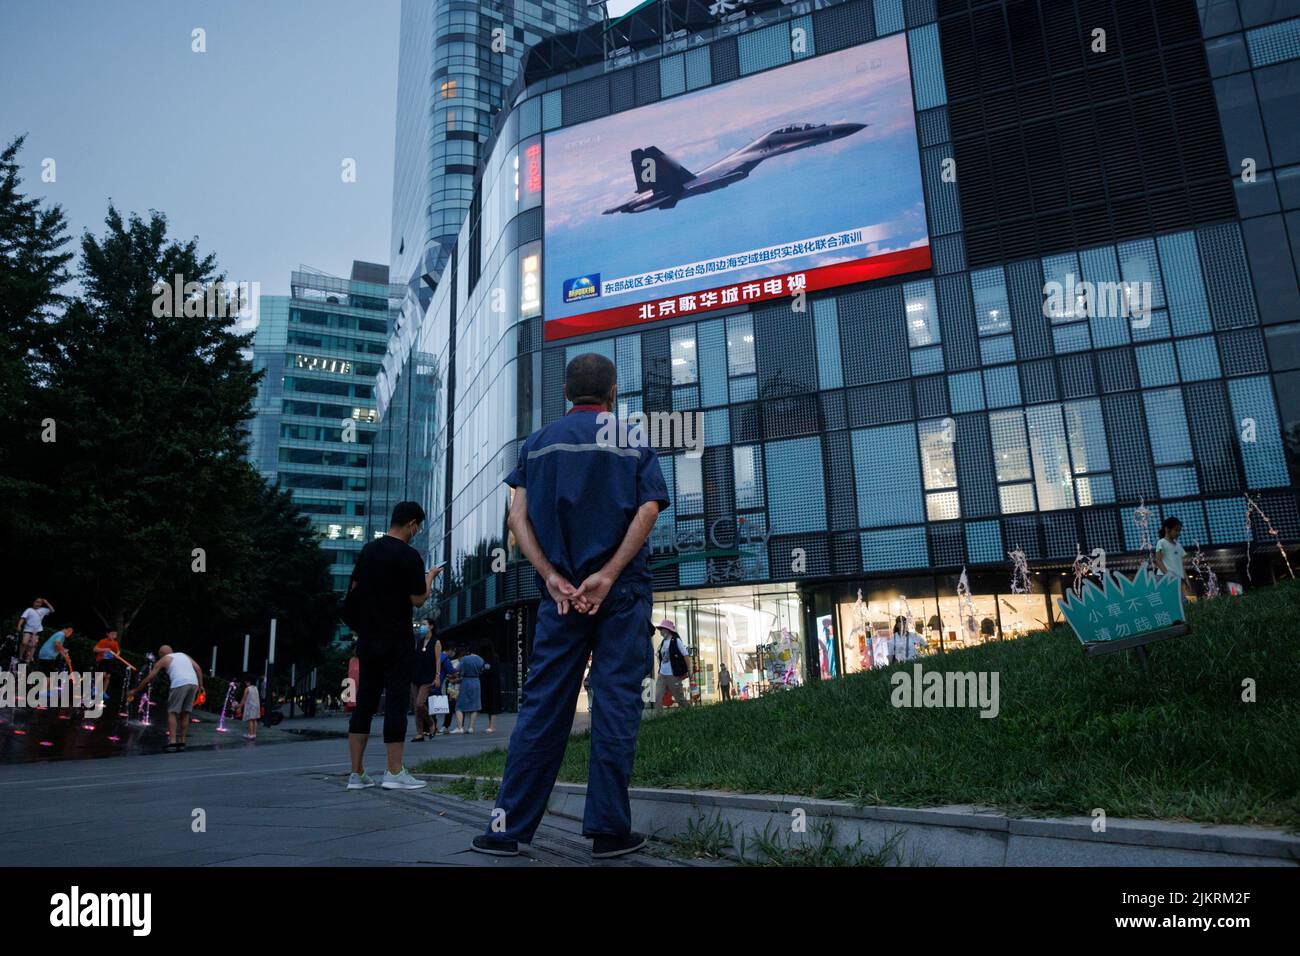 A man watches a CCTV news broadcast, showing a fighter jet during joint military operations near Taiwan by the Chinese People's Liberation Army's (PLA) Eastern Theatre Command, at a shopping center in Beijing, China, August 3, 2022. REUTERS/Thomas Peter Stock Photo